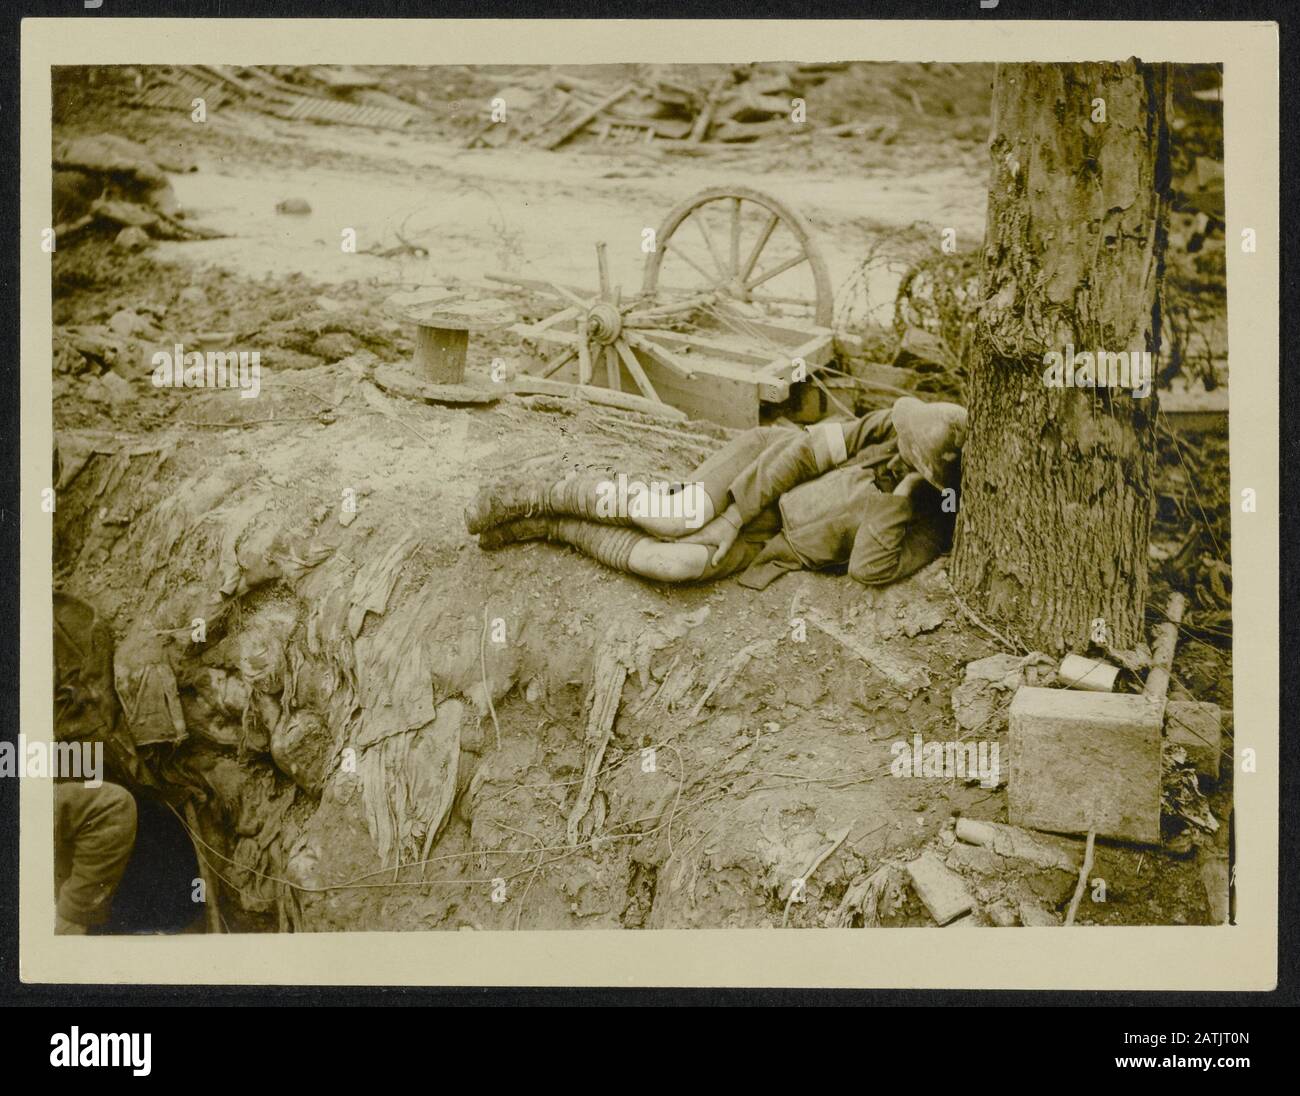 The British Western Front. Battle of Flanders Description: A tired out Tommy has a rest by the roadside. Annotation: The British Western Front. The battle of Flanders. An exhausted British soldier resting at the side of the road. Date: {1914-1918} Location: Belgium Keywords: WWI, fronts, soldiers, equip Stock Photo